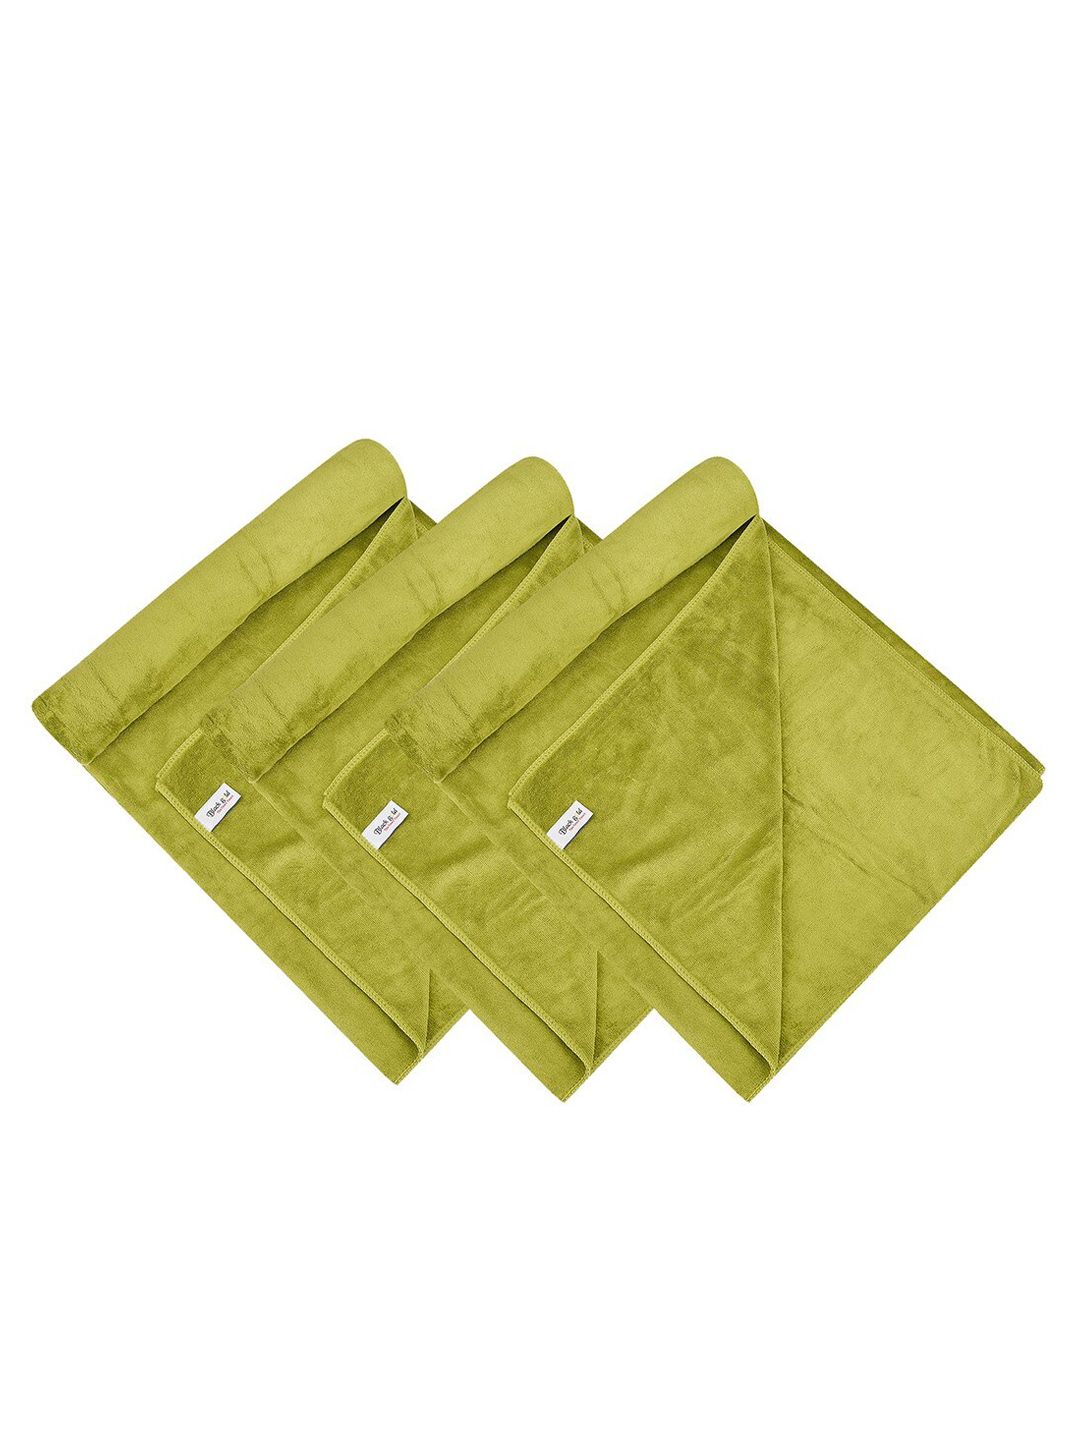 Black Gold Set Of 3 Solid 400 GSM Microfiber Bath Towels Price in India